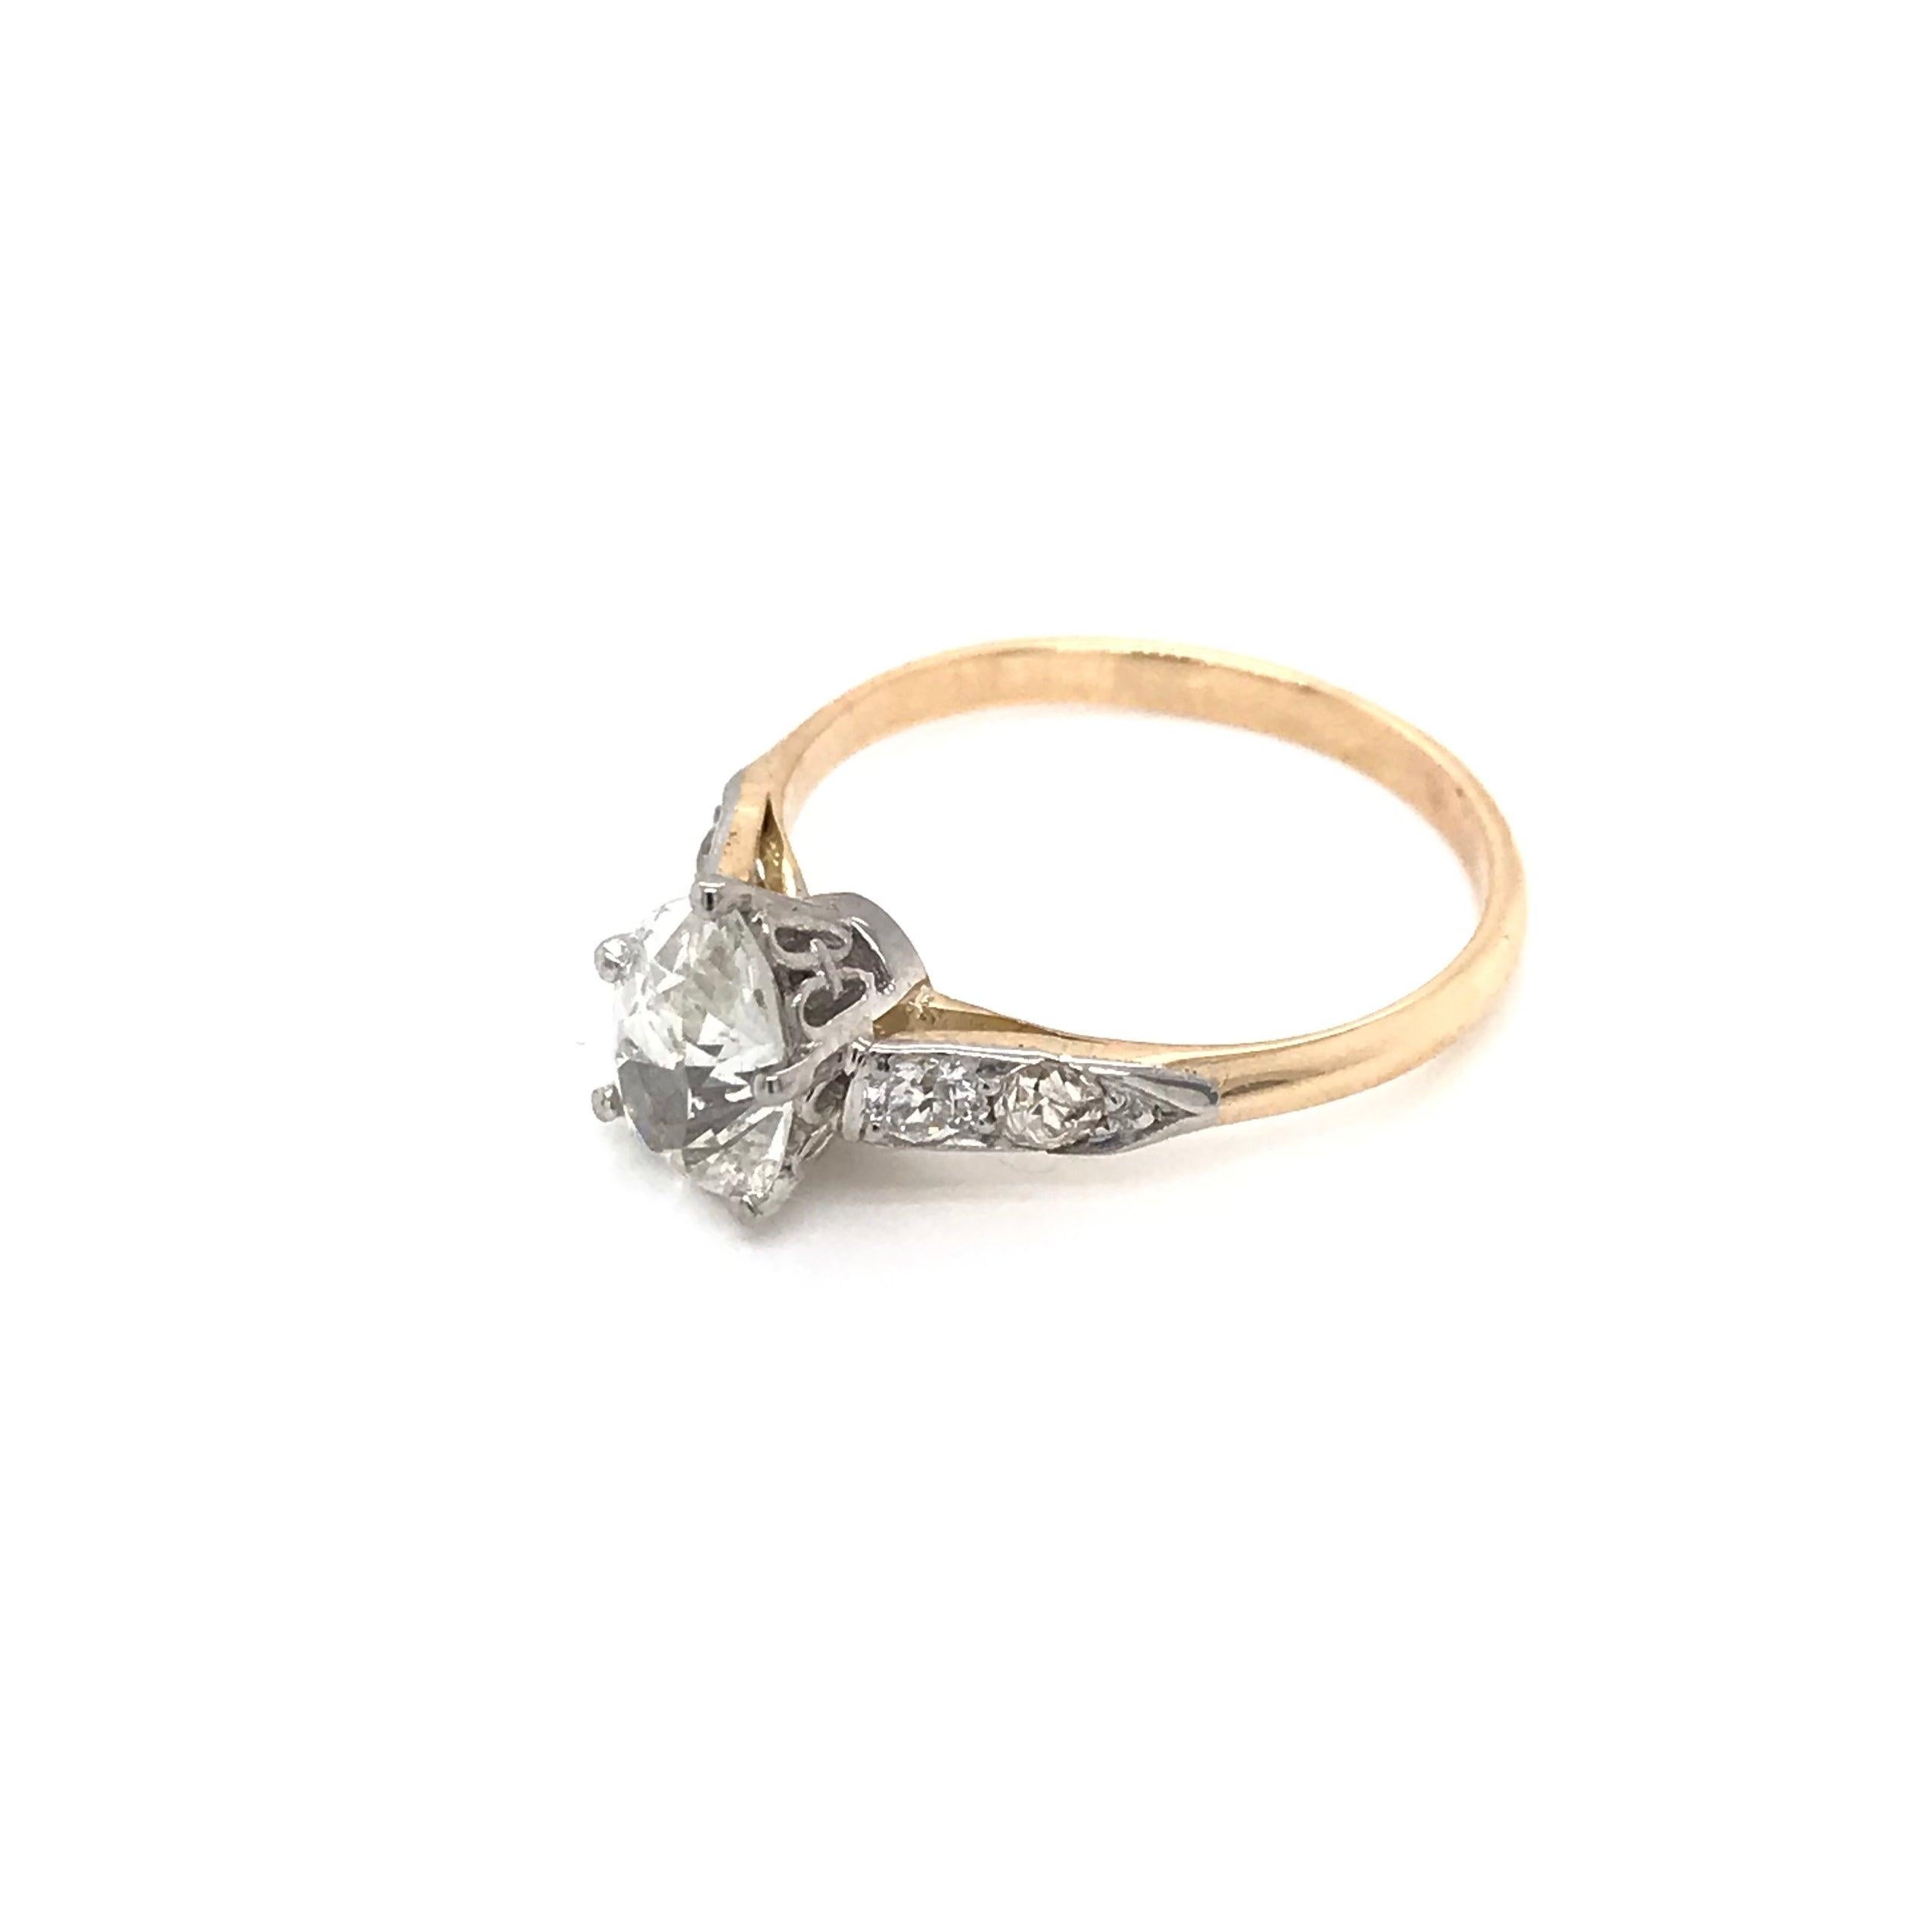 This solitaire style diamond ring is an estate piece. The ring features a center pear cut diamond measuring approximately 0.95 carats and grading J in color, SI1 in clarity. The setting is 14k yellow gold with 14k white gold accents. The setting